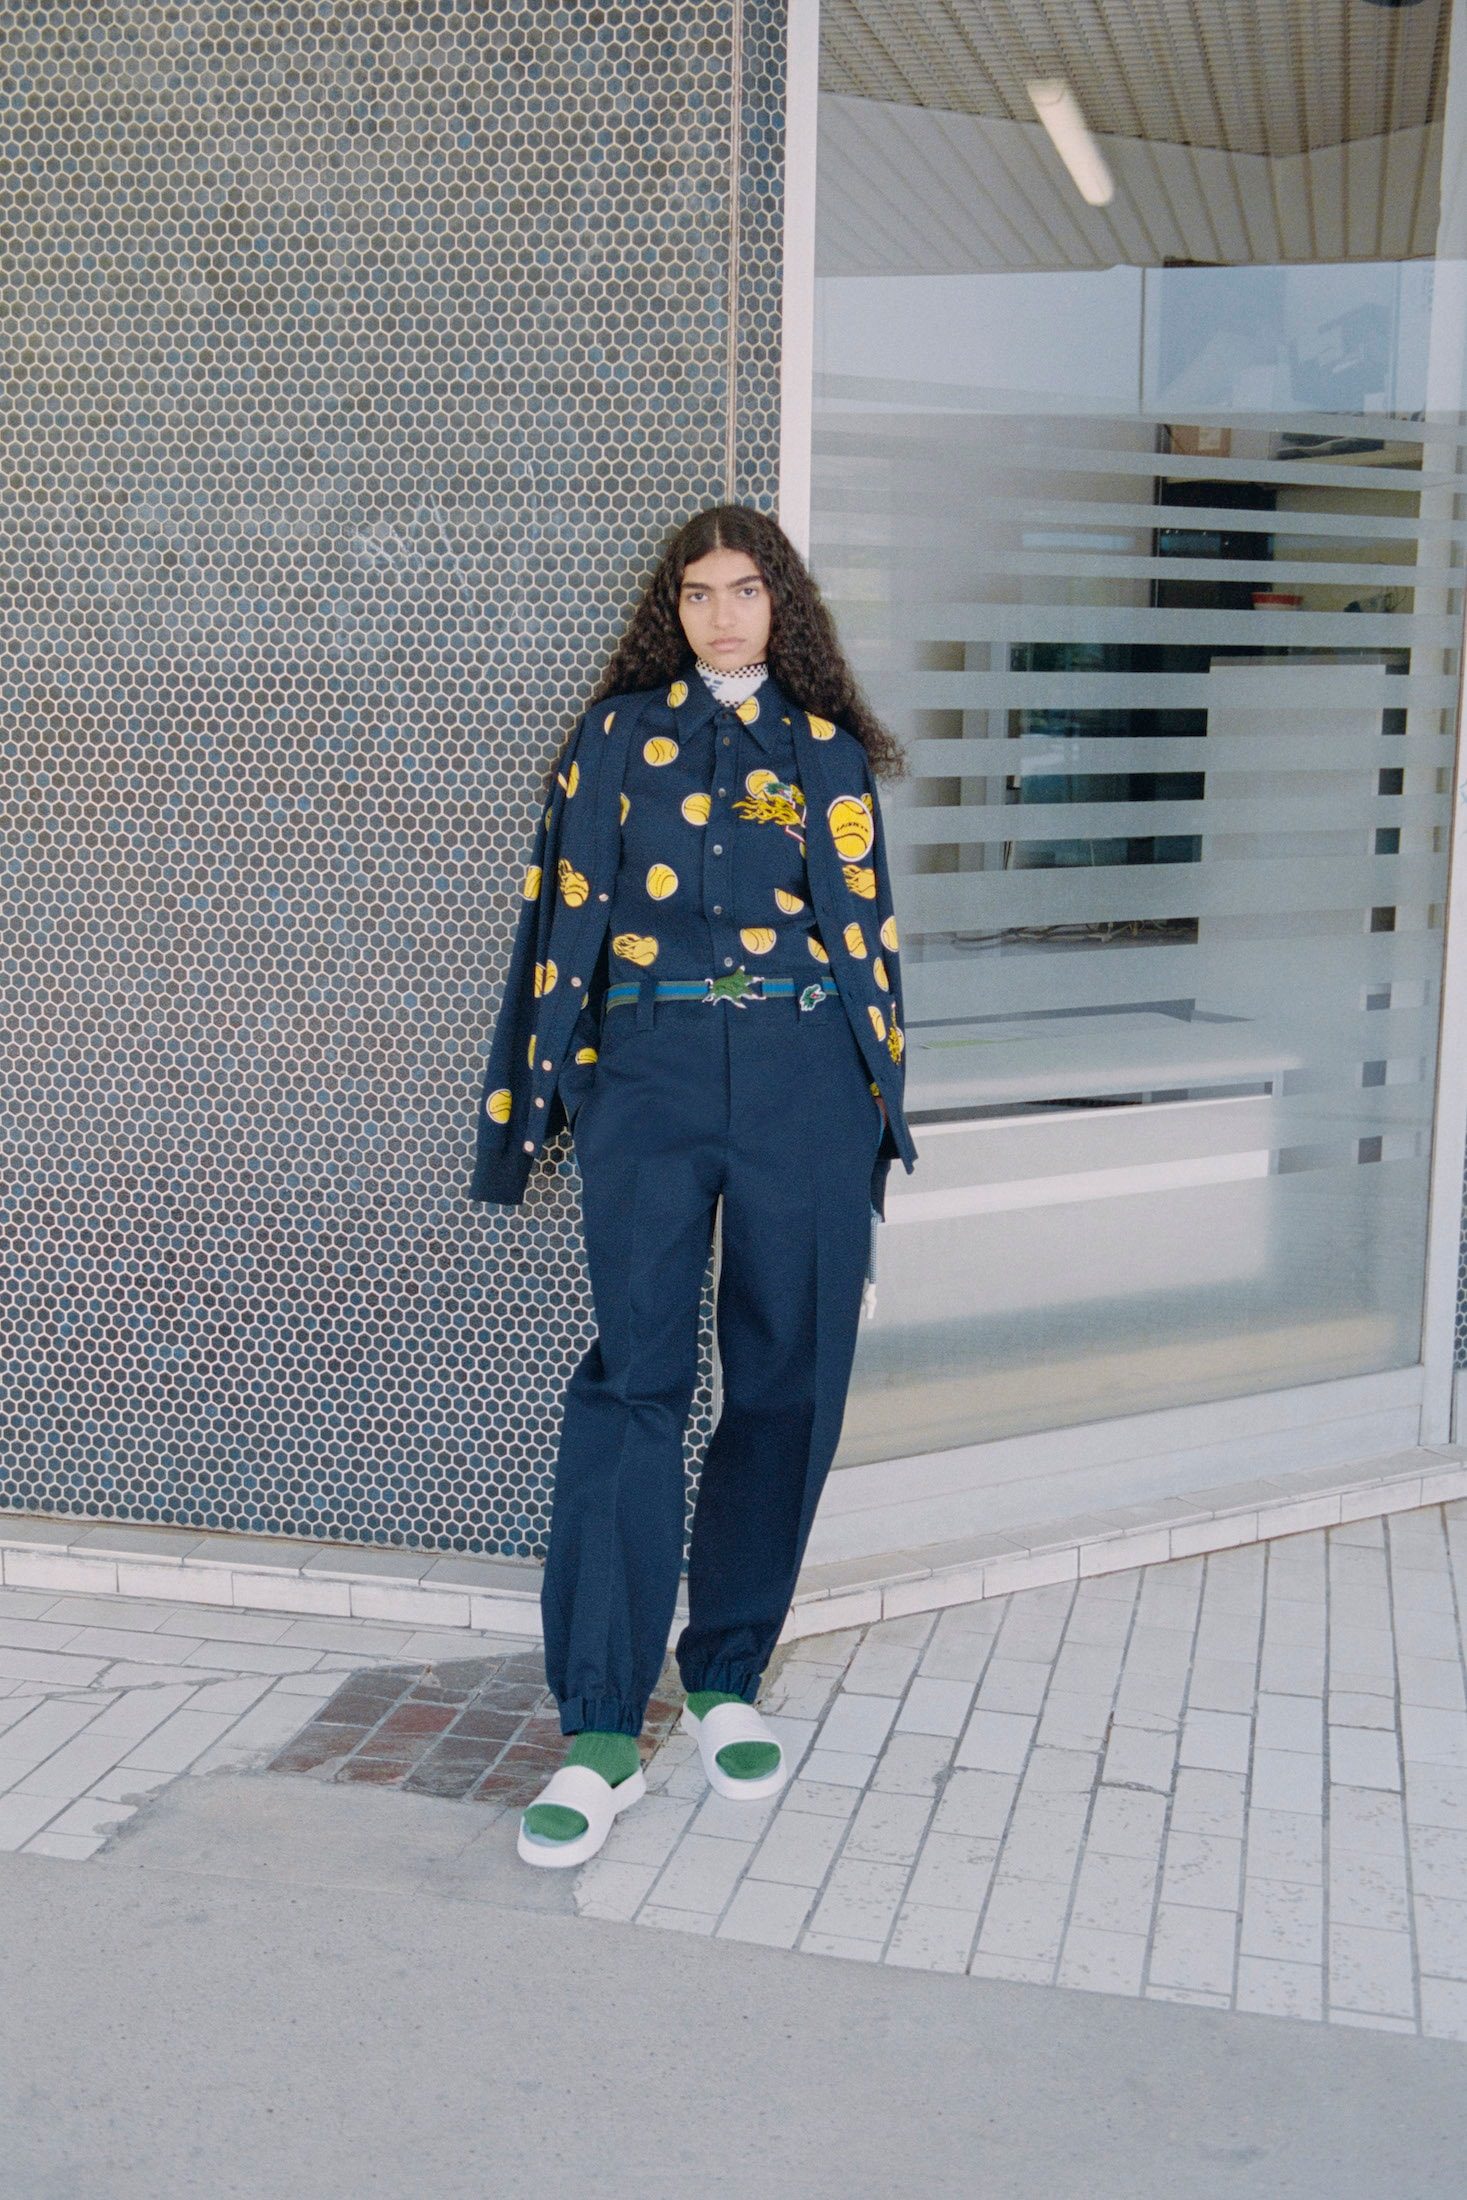 Lacoste Fall/Winter 2021 Collection Interview Louise Trotter Designer Heritage Print Crocodile Logo Iconography